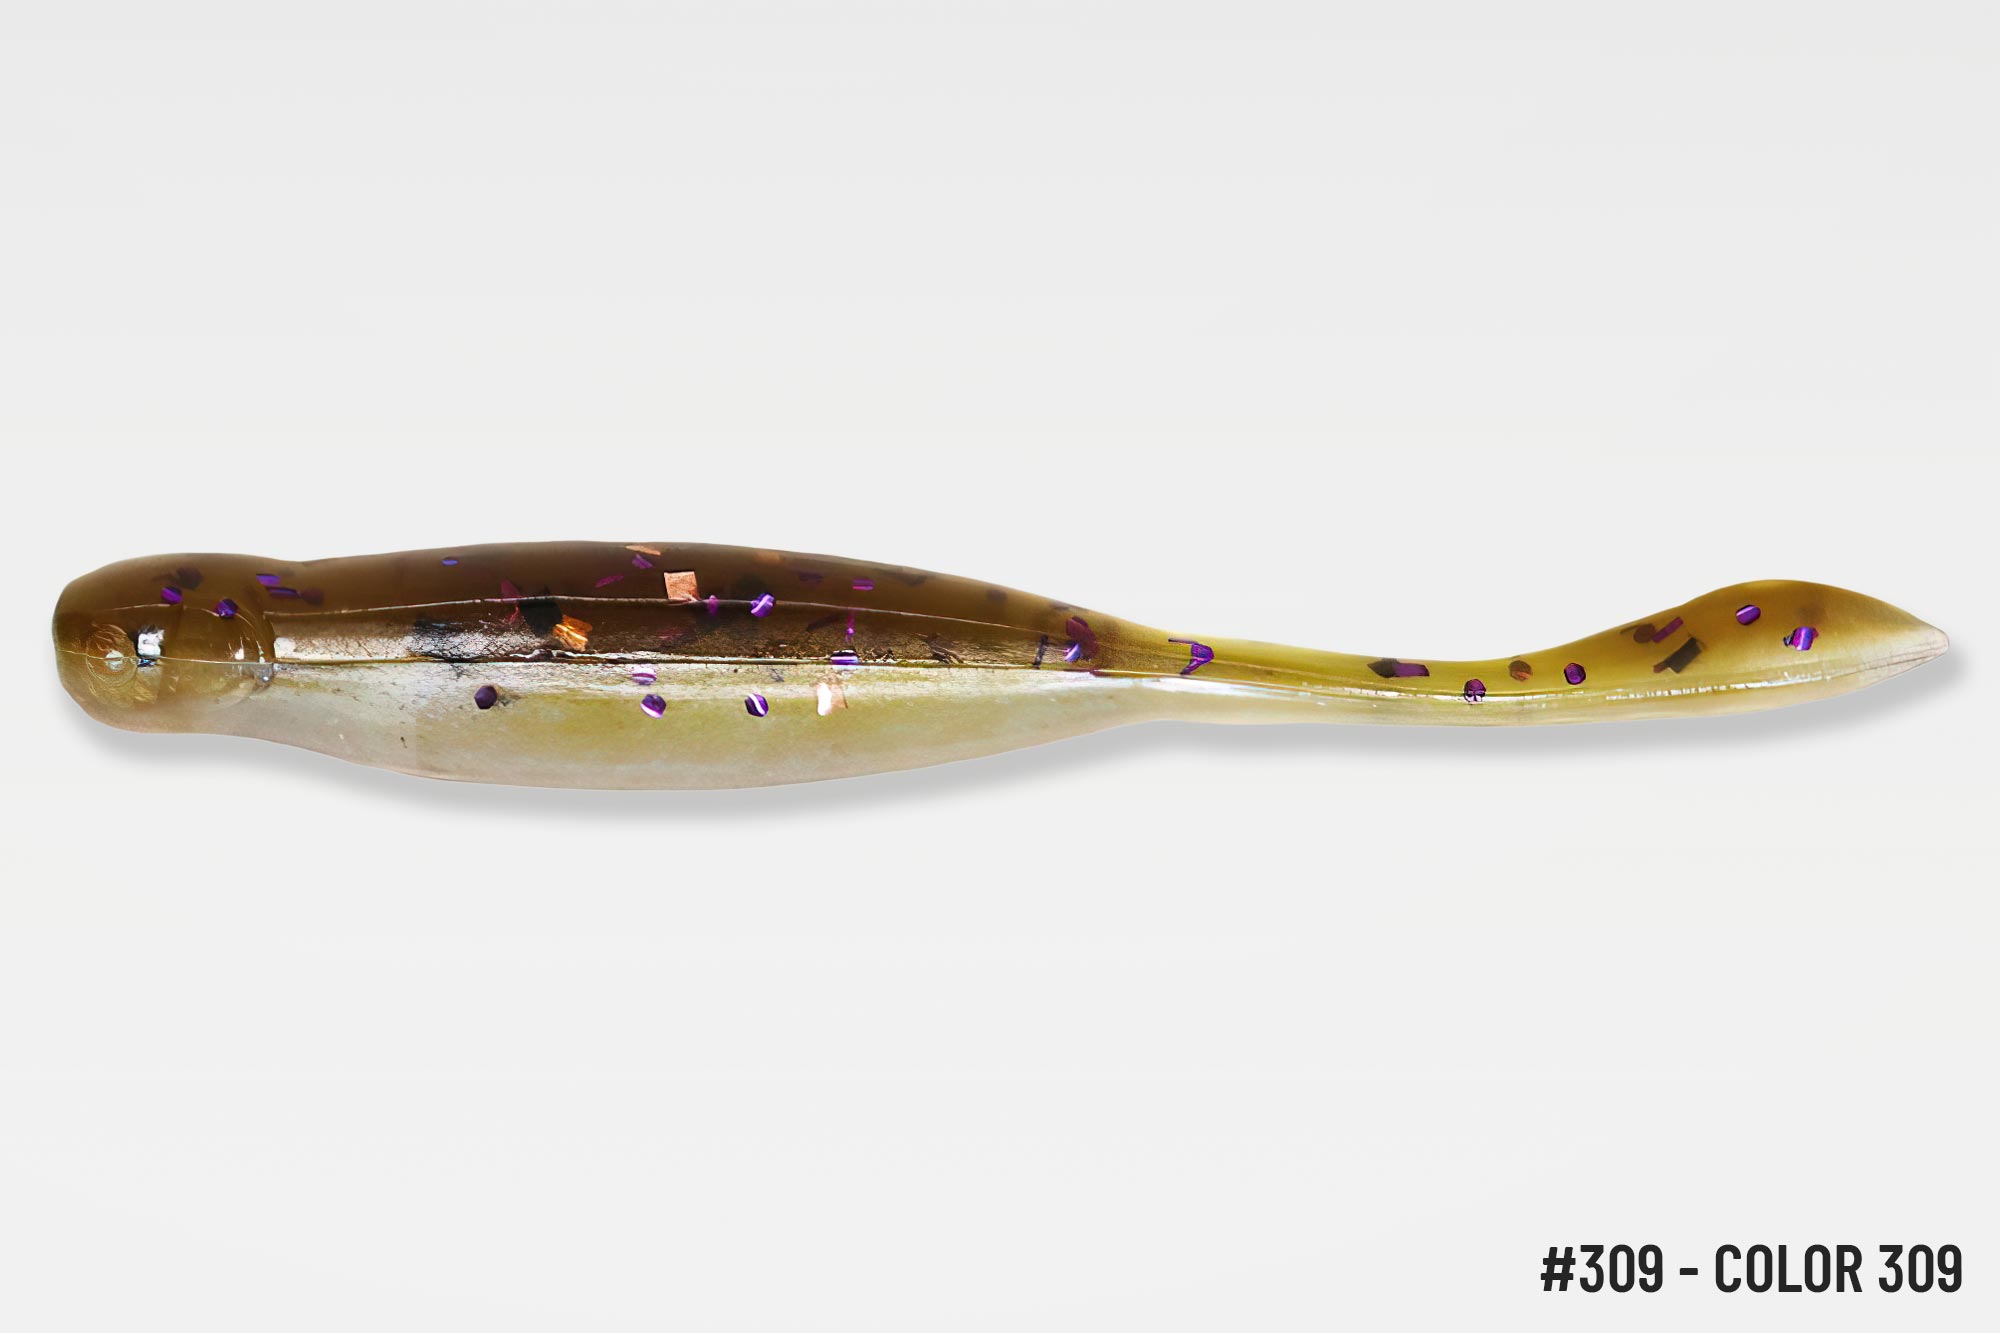 https://floridafishing.fr/wp-content/uploads/2022/03/x-zone-lures-hot-shot-minnow-color-309.jpg